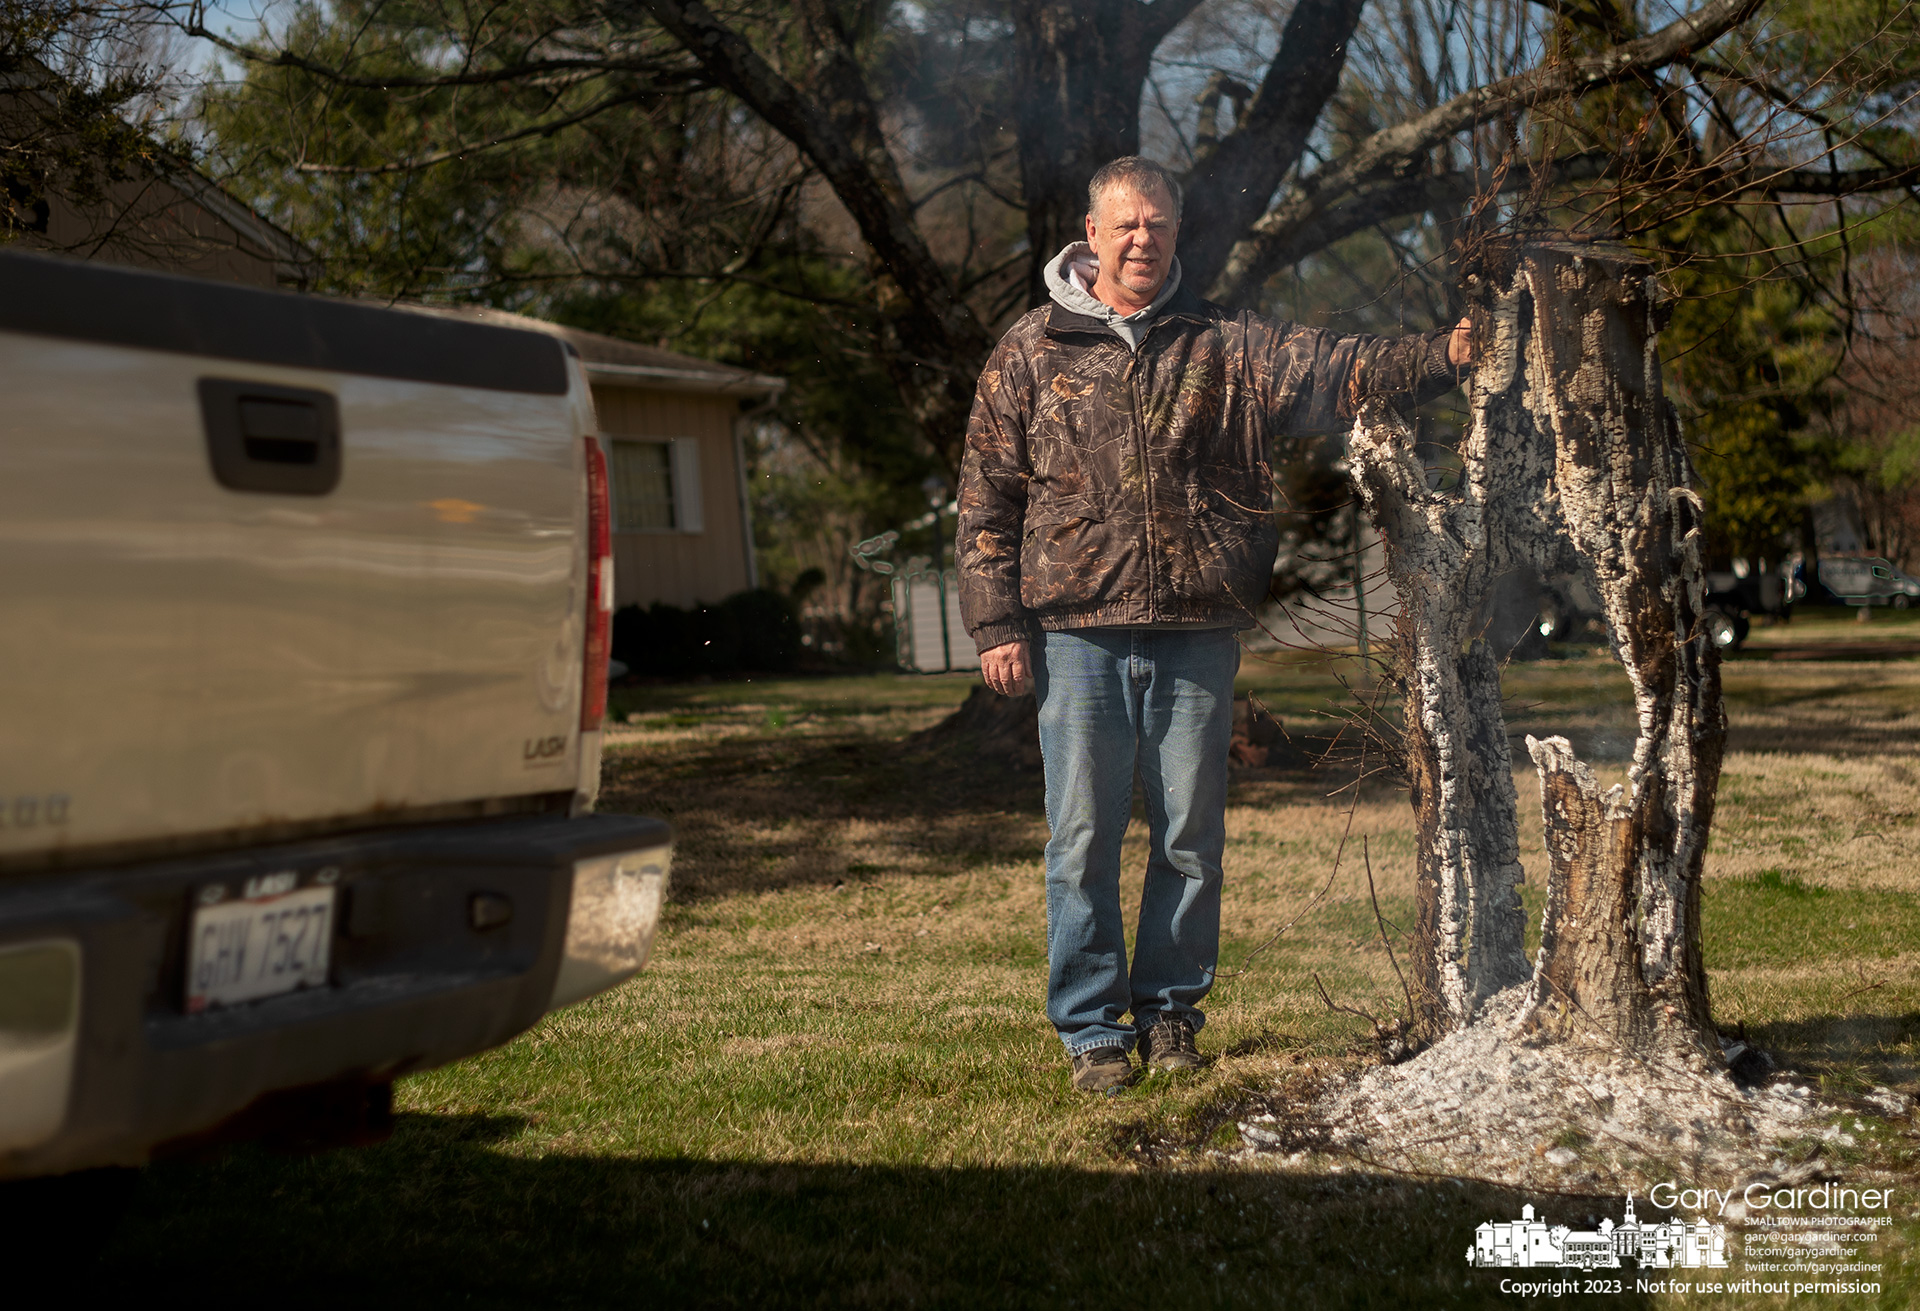 Terry Tuller poses with the crabapple tree stump burning in his front yard in an effort to complete the task of removing the tree that recently died and was cut down. My Final Photo for March 5, 2023.